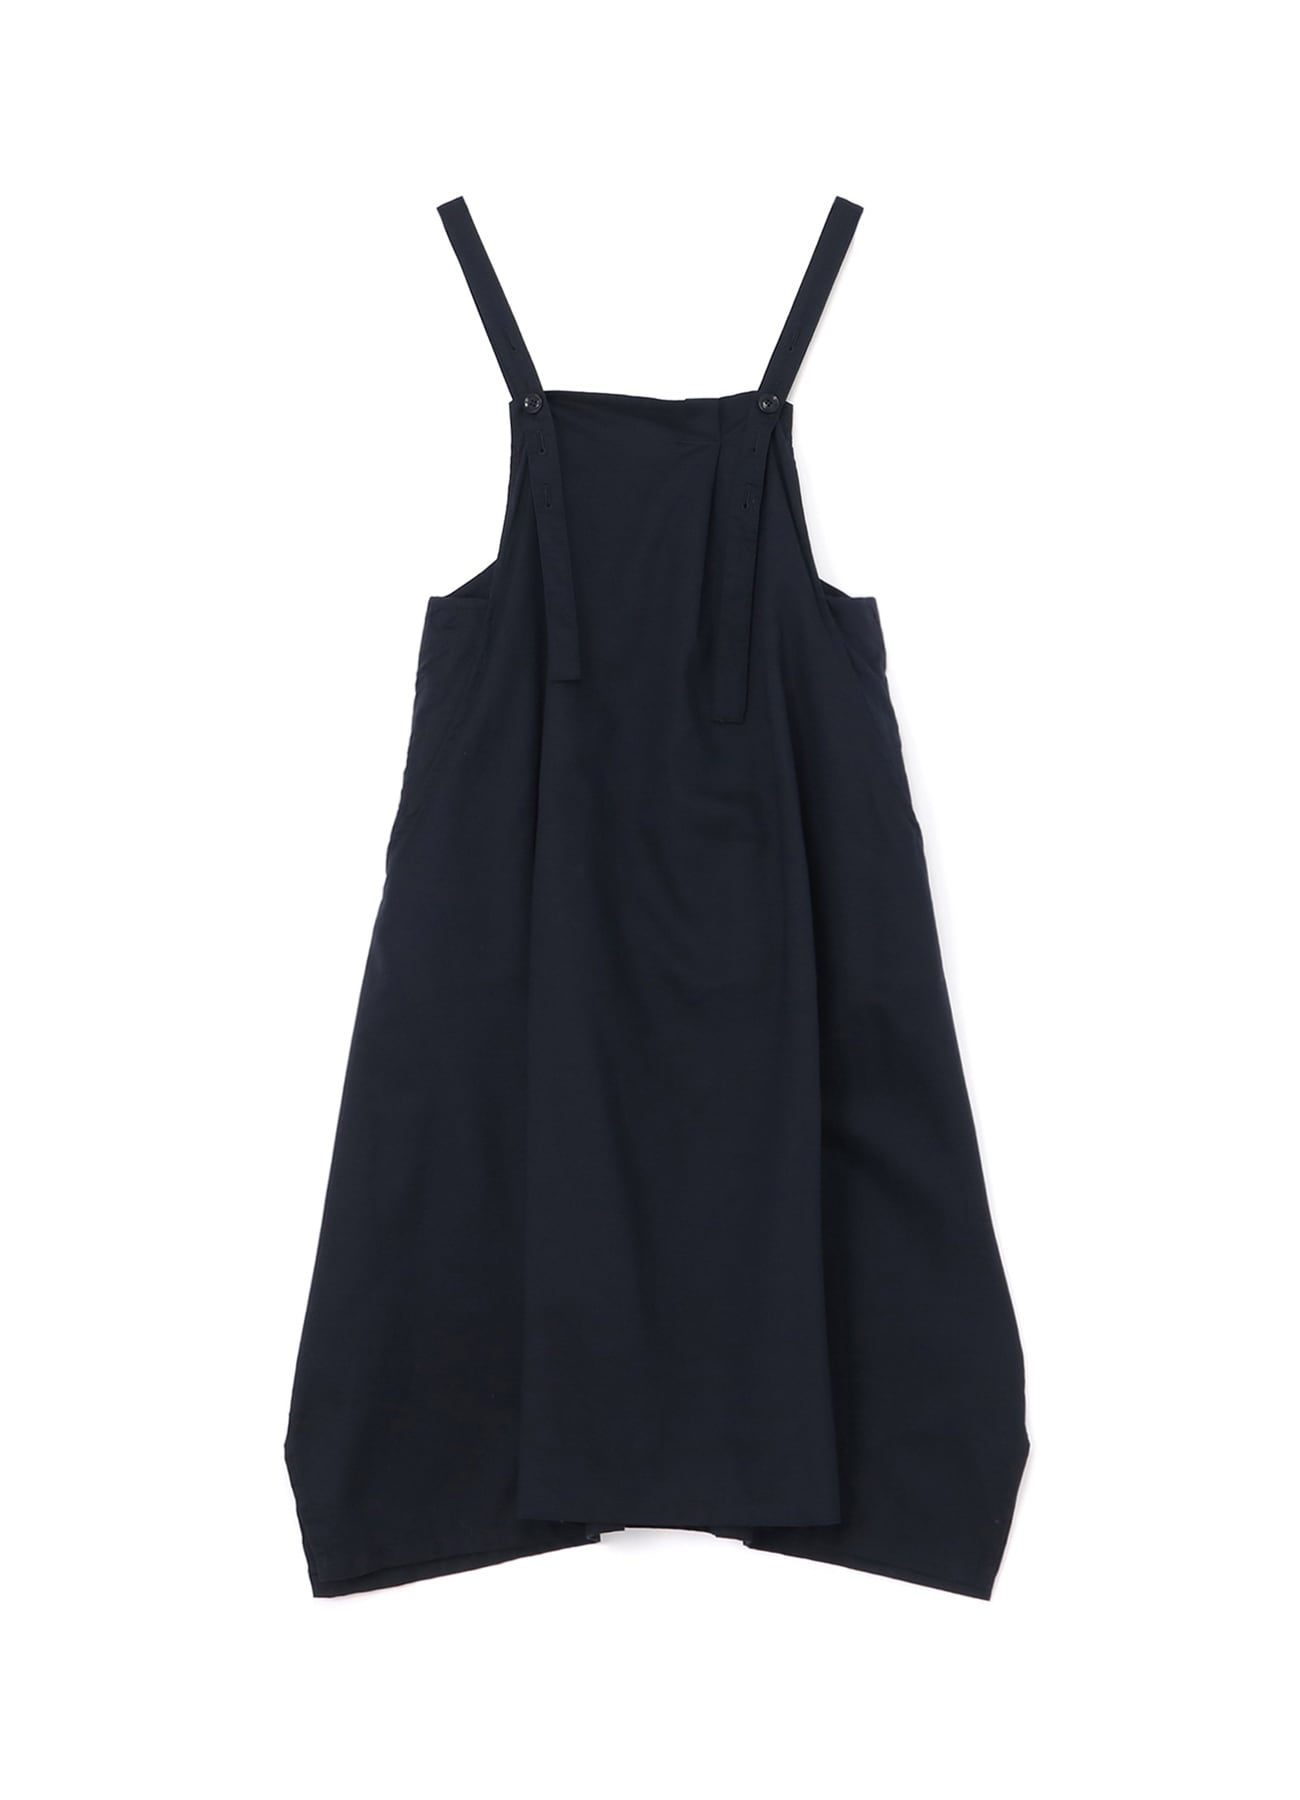 [Y's BORN PRODUCT]COTTON THIN TWILL FRONT TUCK SHOULDER STRAP DRESS